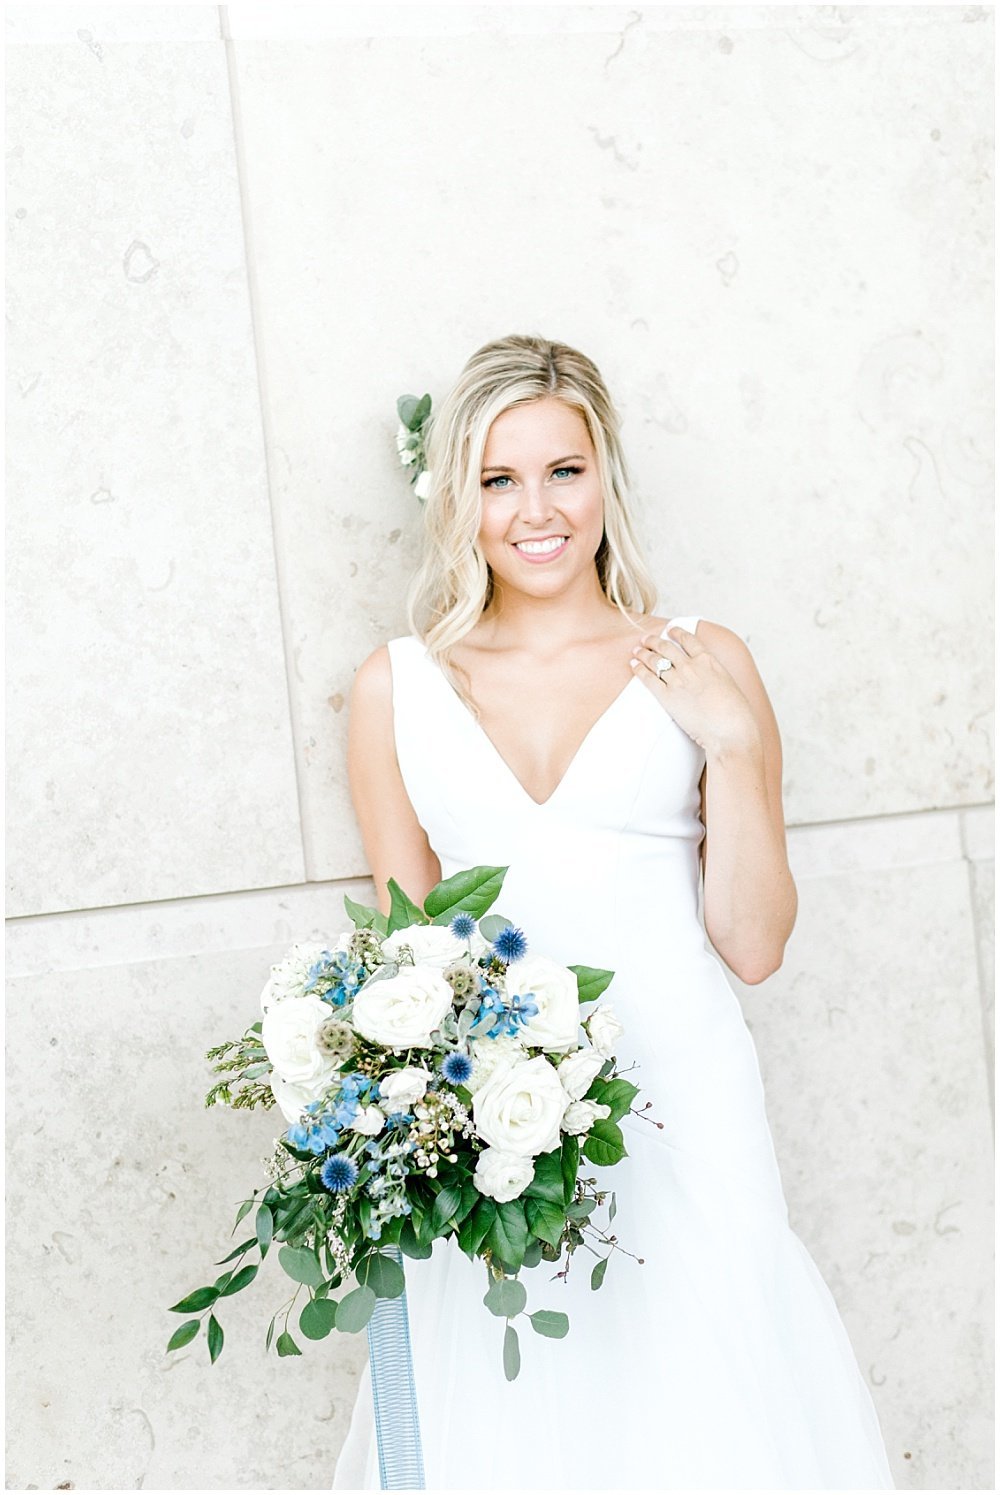 NFL-Player-Nick-Martin-Indianapolis-Indiana-Wedding-The-Knot-Featured-Jessica-Dum-Wedding-Coordination-photo__0017